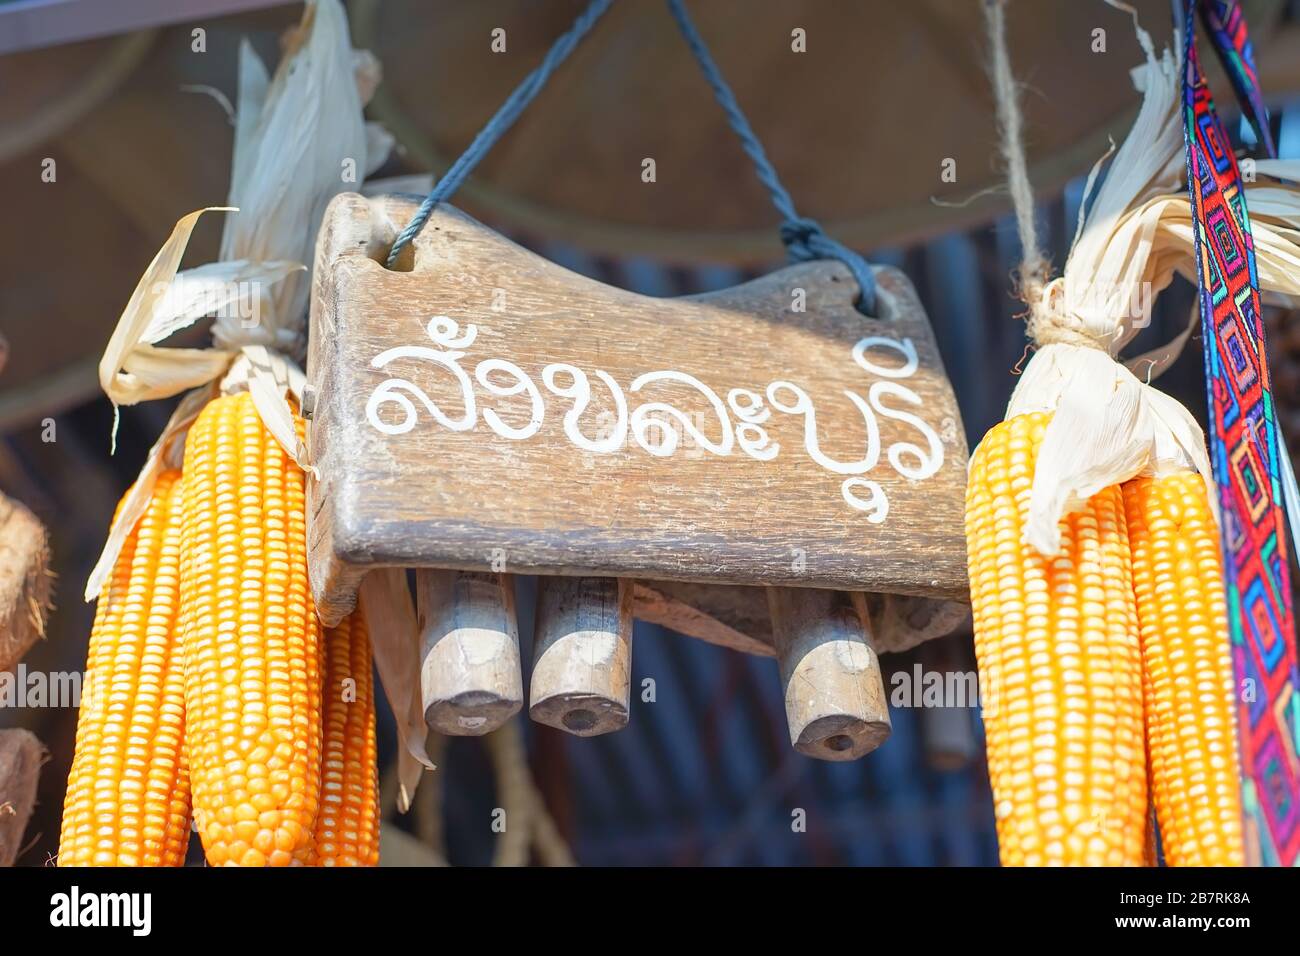 Wooden sign of the travel destinations Sangkhla Buri district in Kanchanaburi, Thailand. (Translation:Sangkhla Buri district) Stock Photo